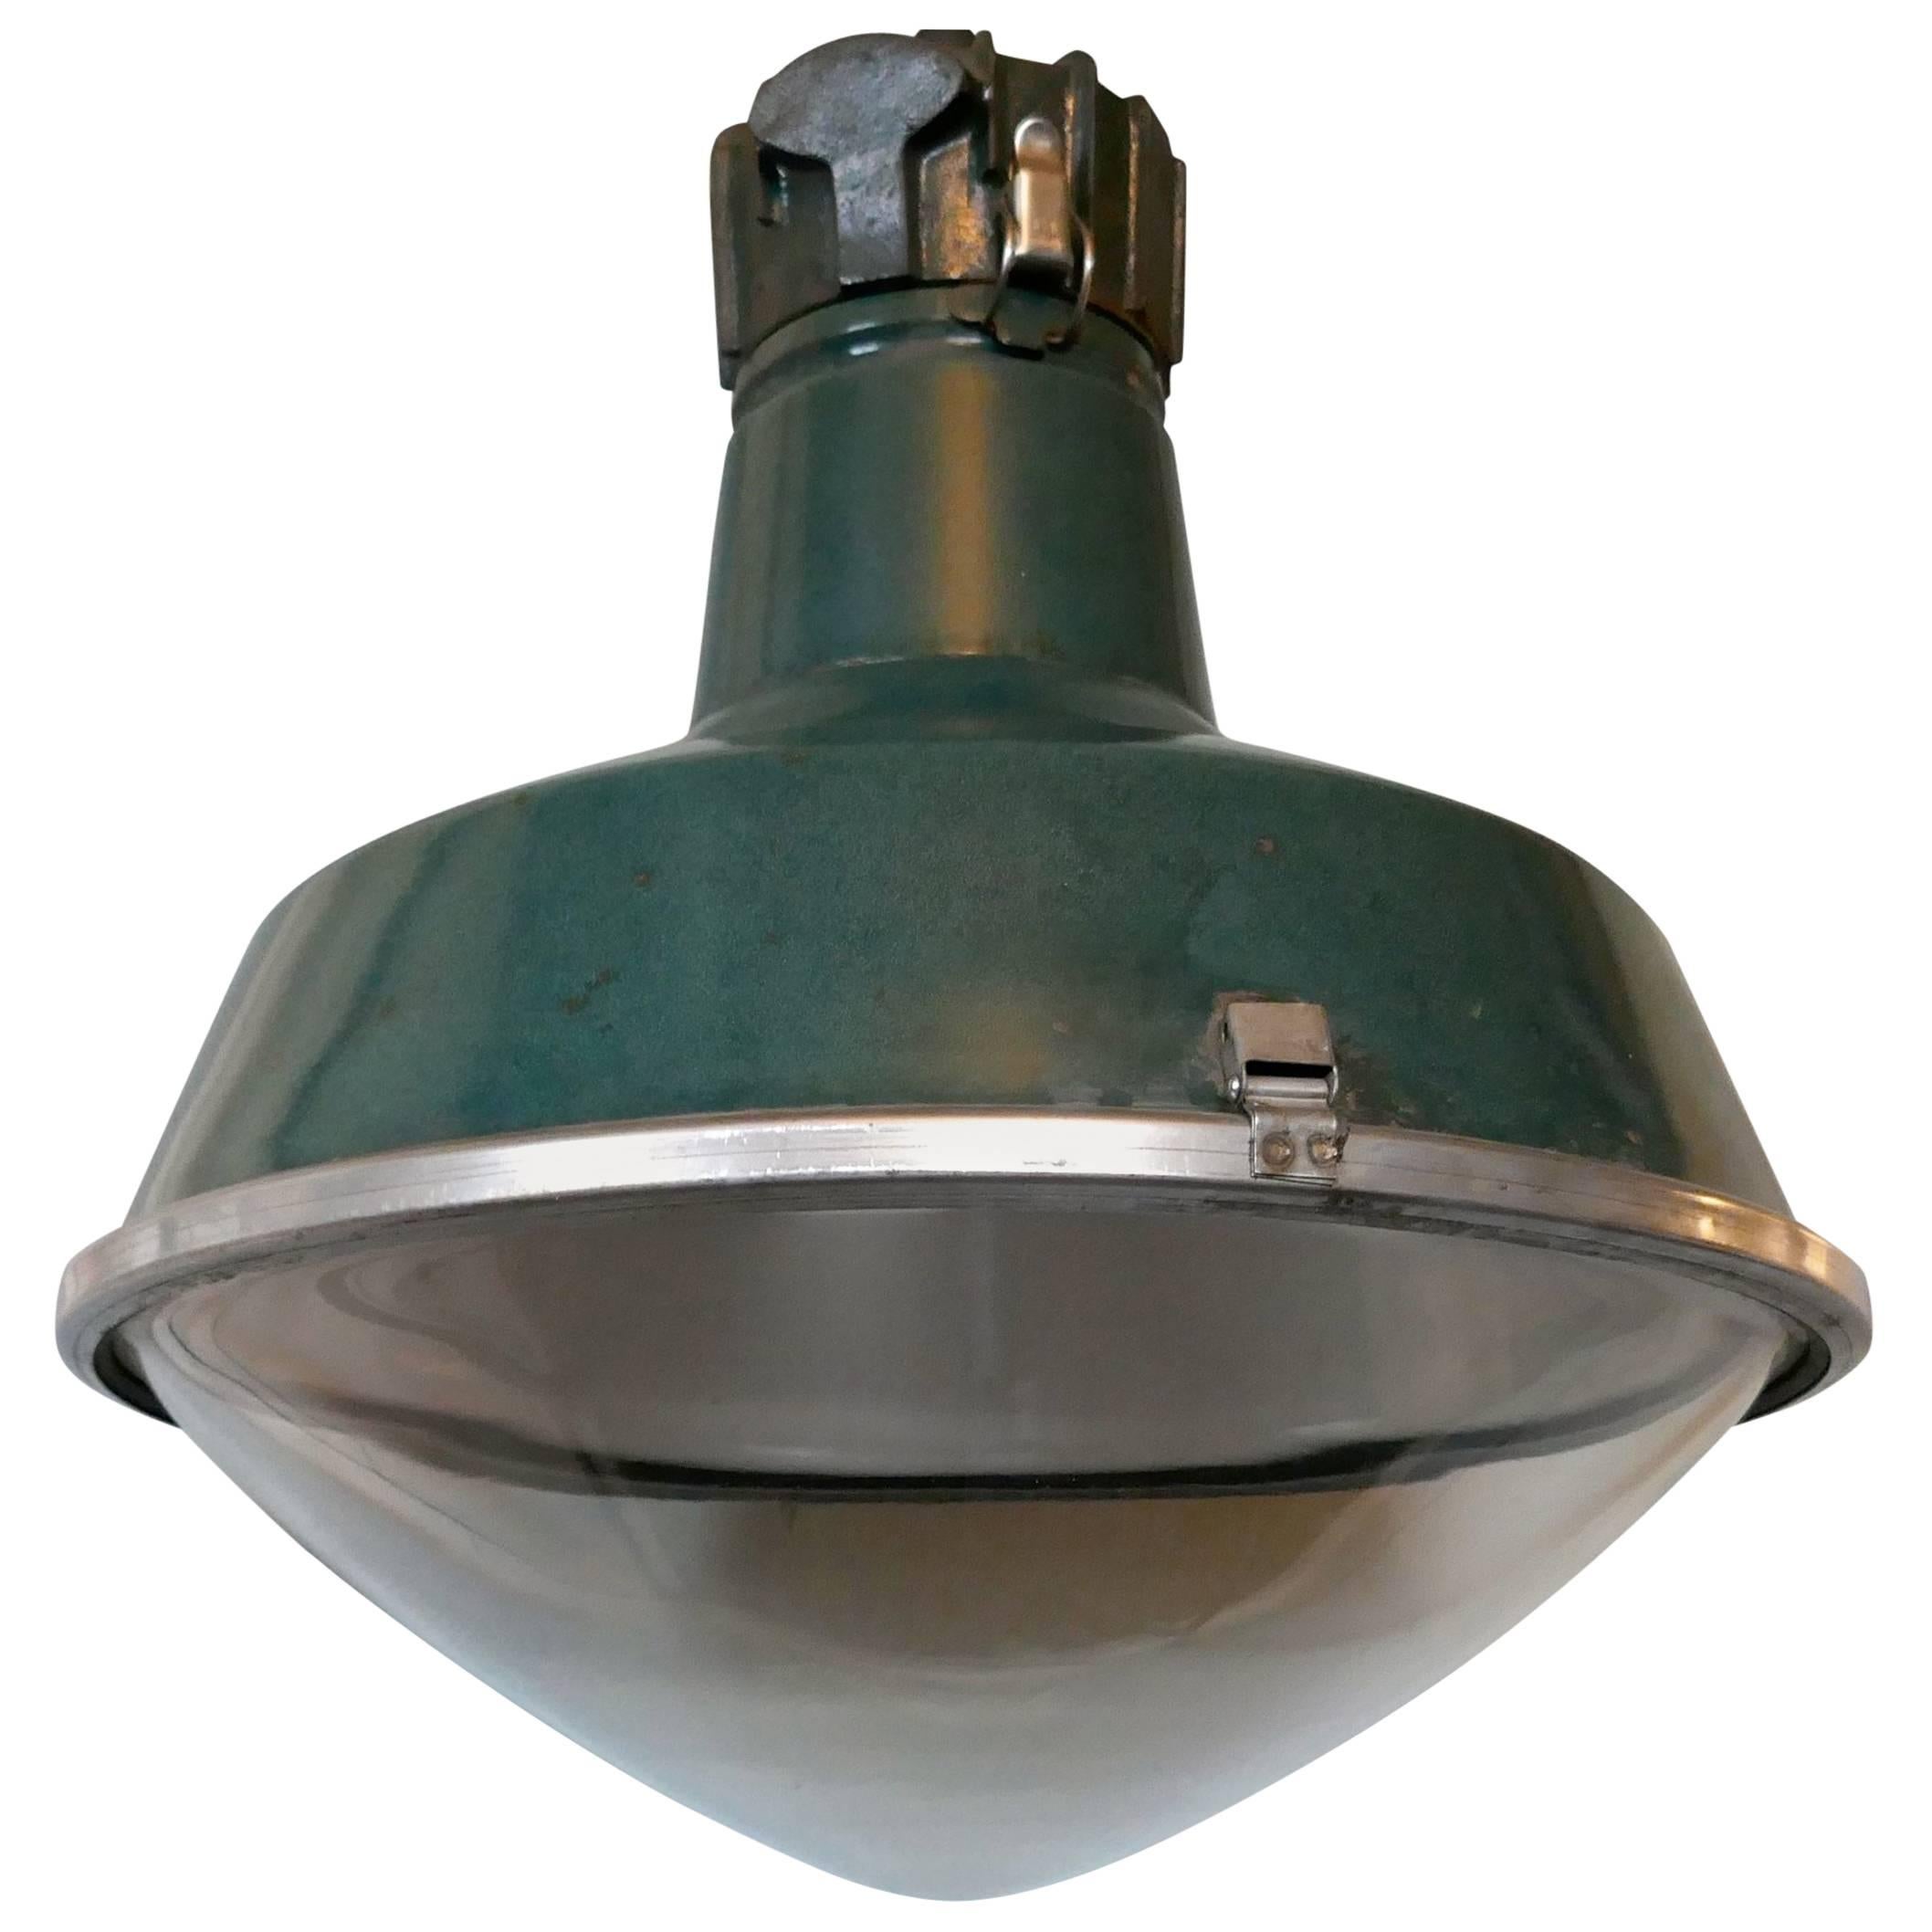 Large Industrial Platform Light from SNCF 'French Rail'